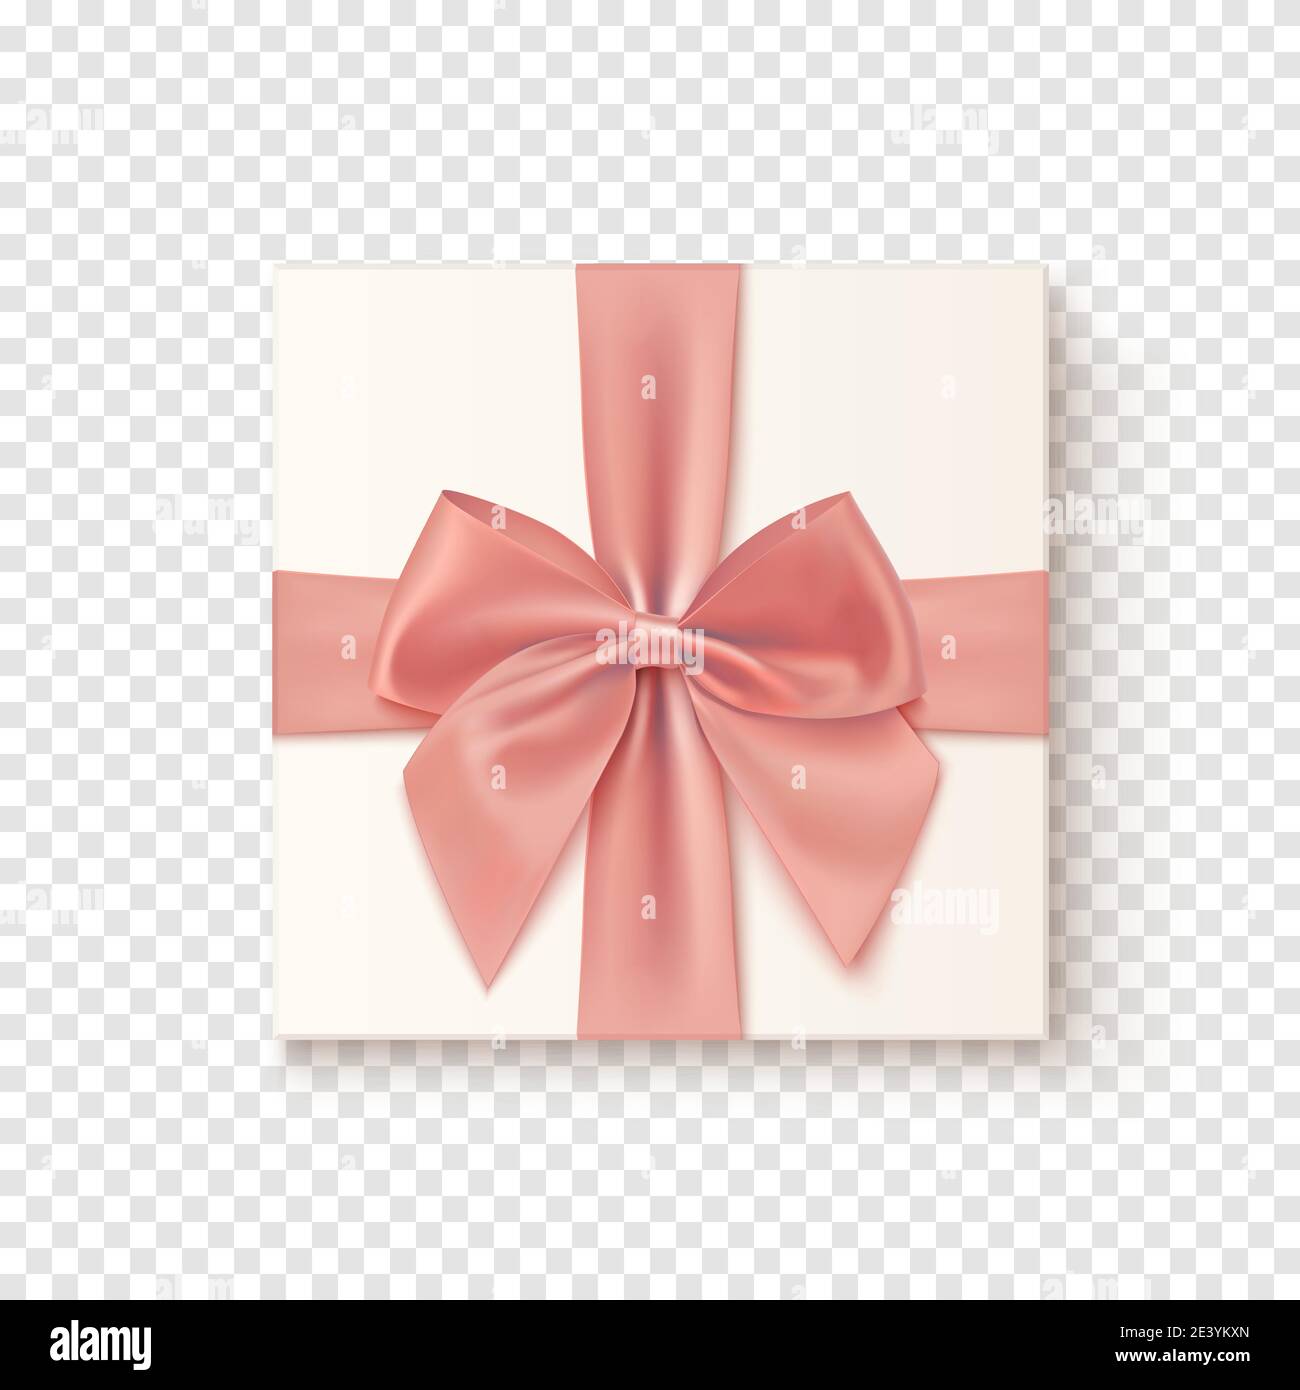 Realistic gift icon with pink bow. Vector illustration template for greeting card, brochure, banner, poster or web header. Stock Vector